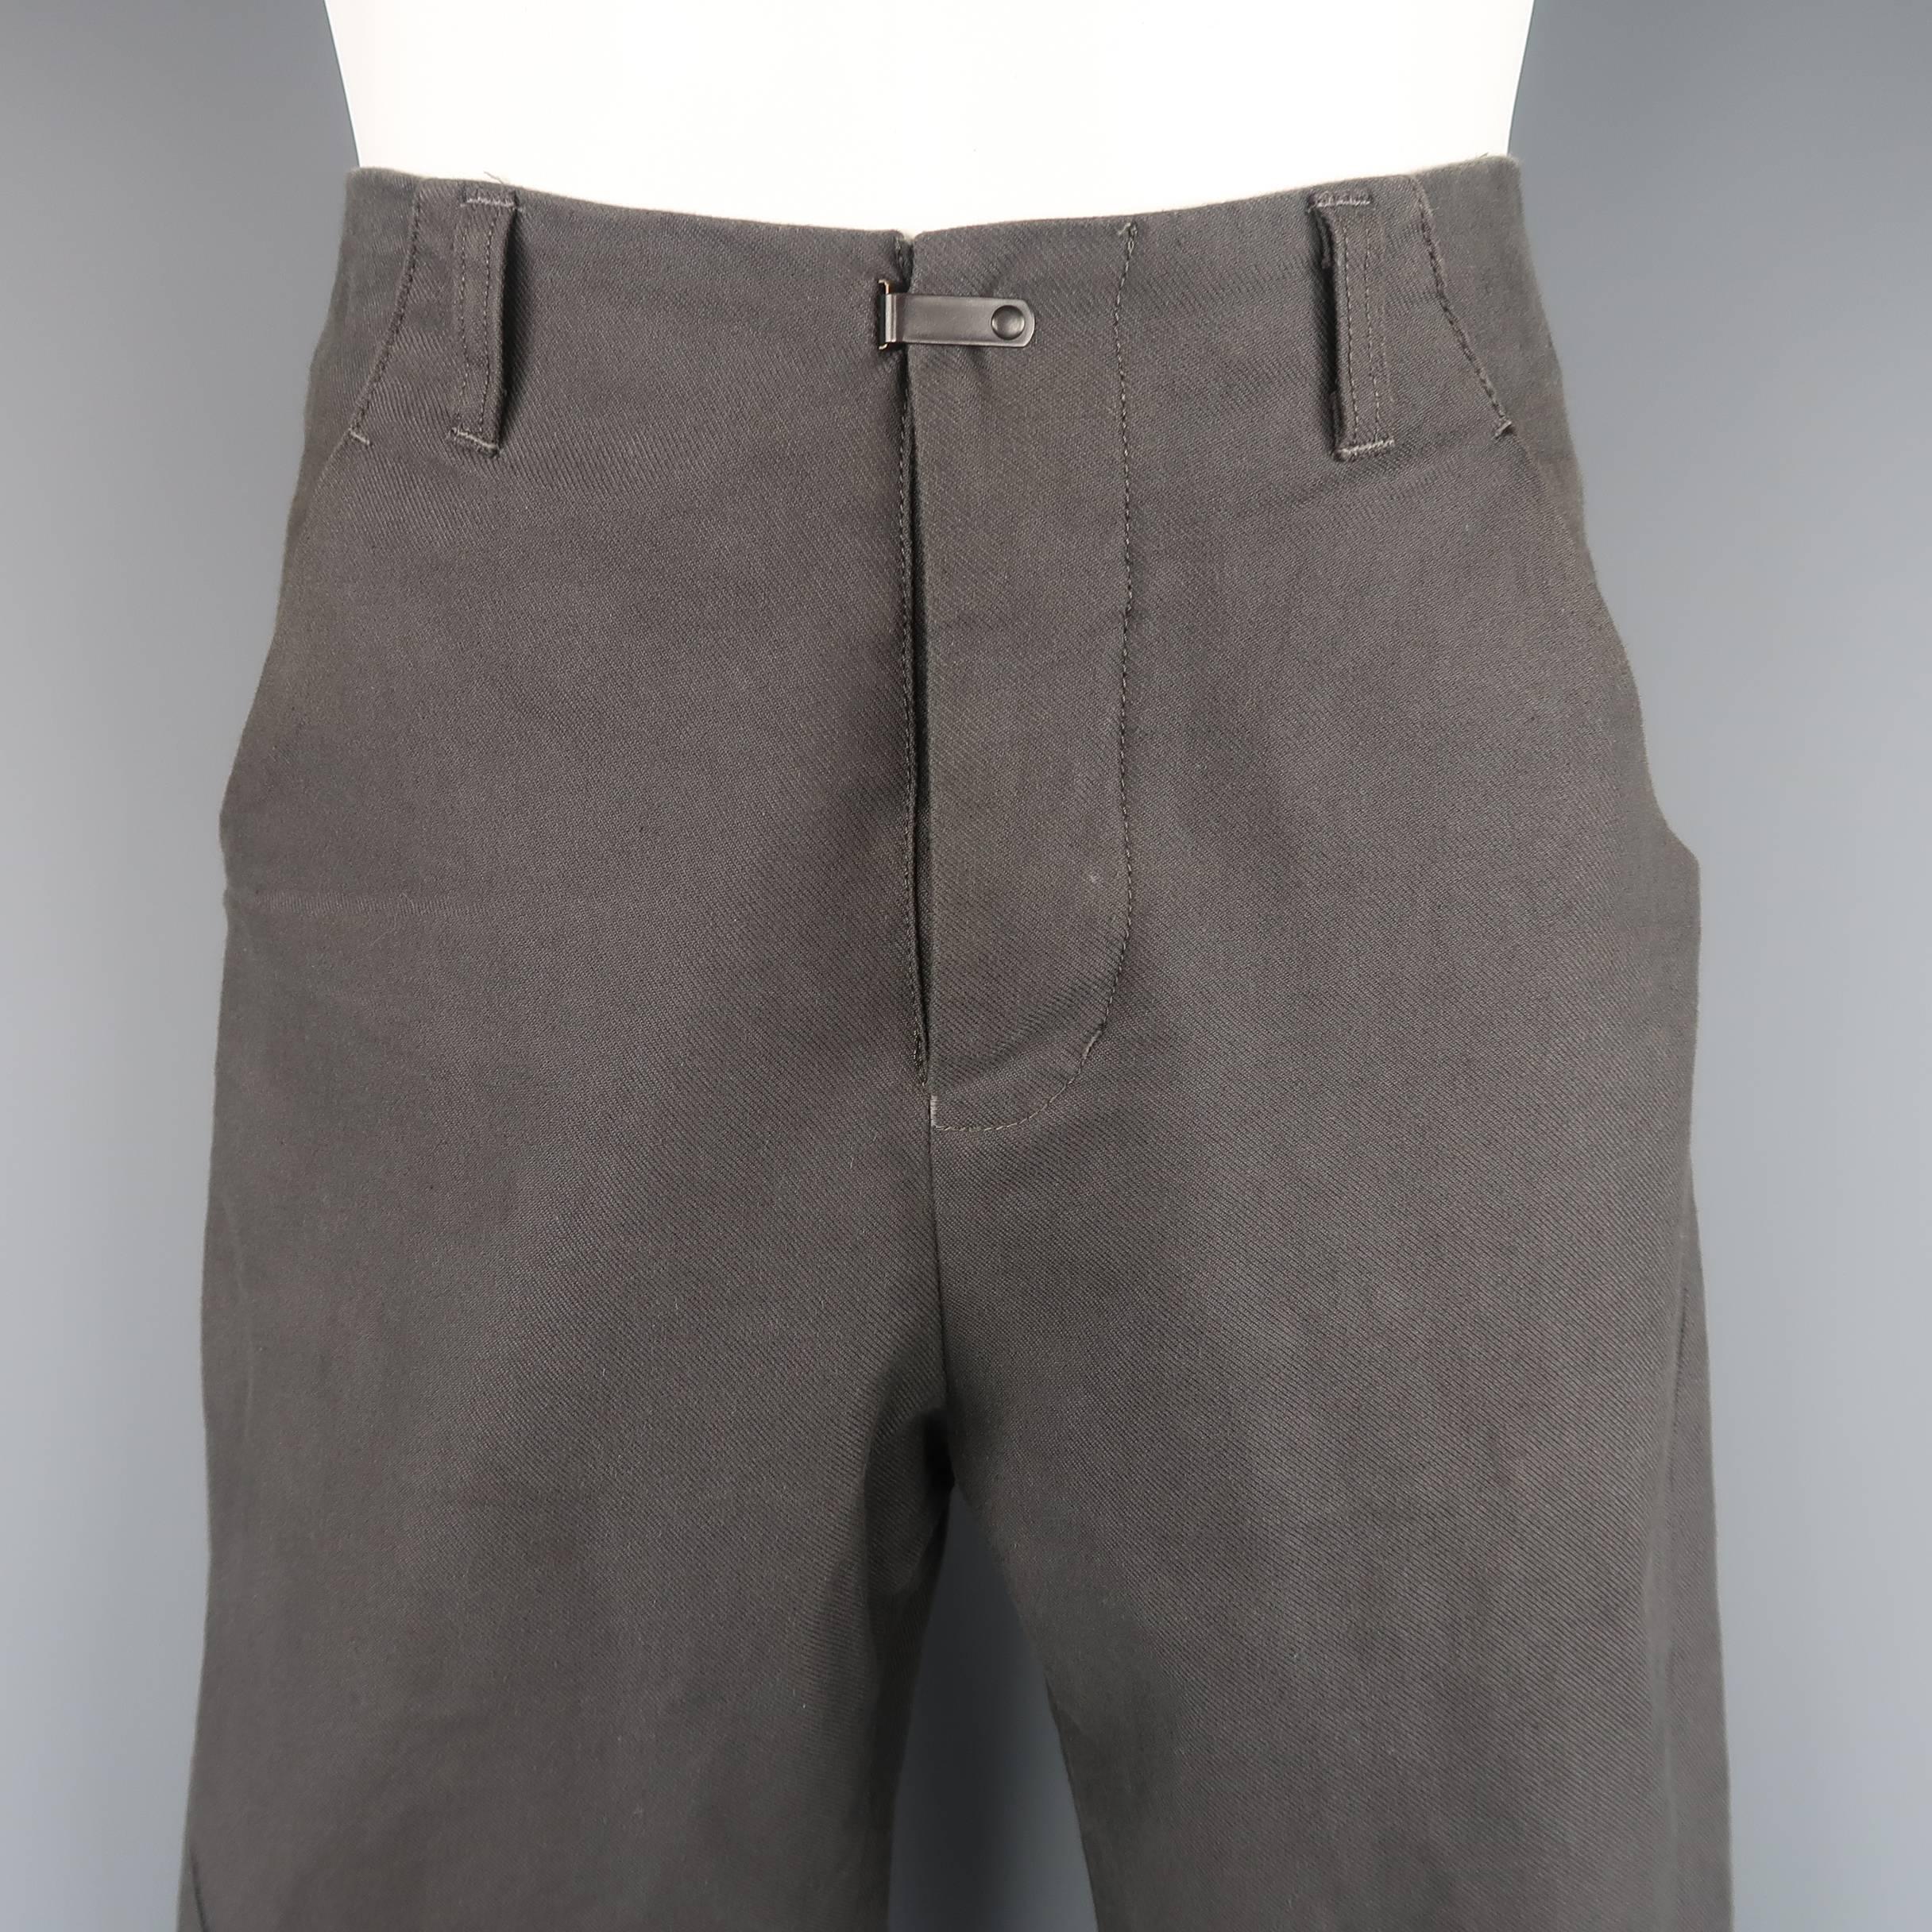 THE VIRDI-ANNE pants come in gray cotton denim twill with a seamless waistband, hood eye closure, four pockets, and curved legs with slanted seams. Wear throughout. Made in Japan.
 
Fair Pre-Owned Condition.
Marked: (no size)
 
Measurements:
